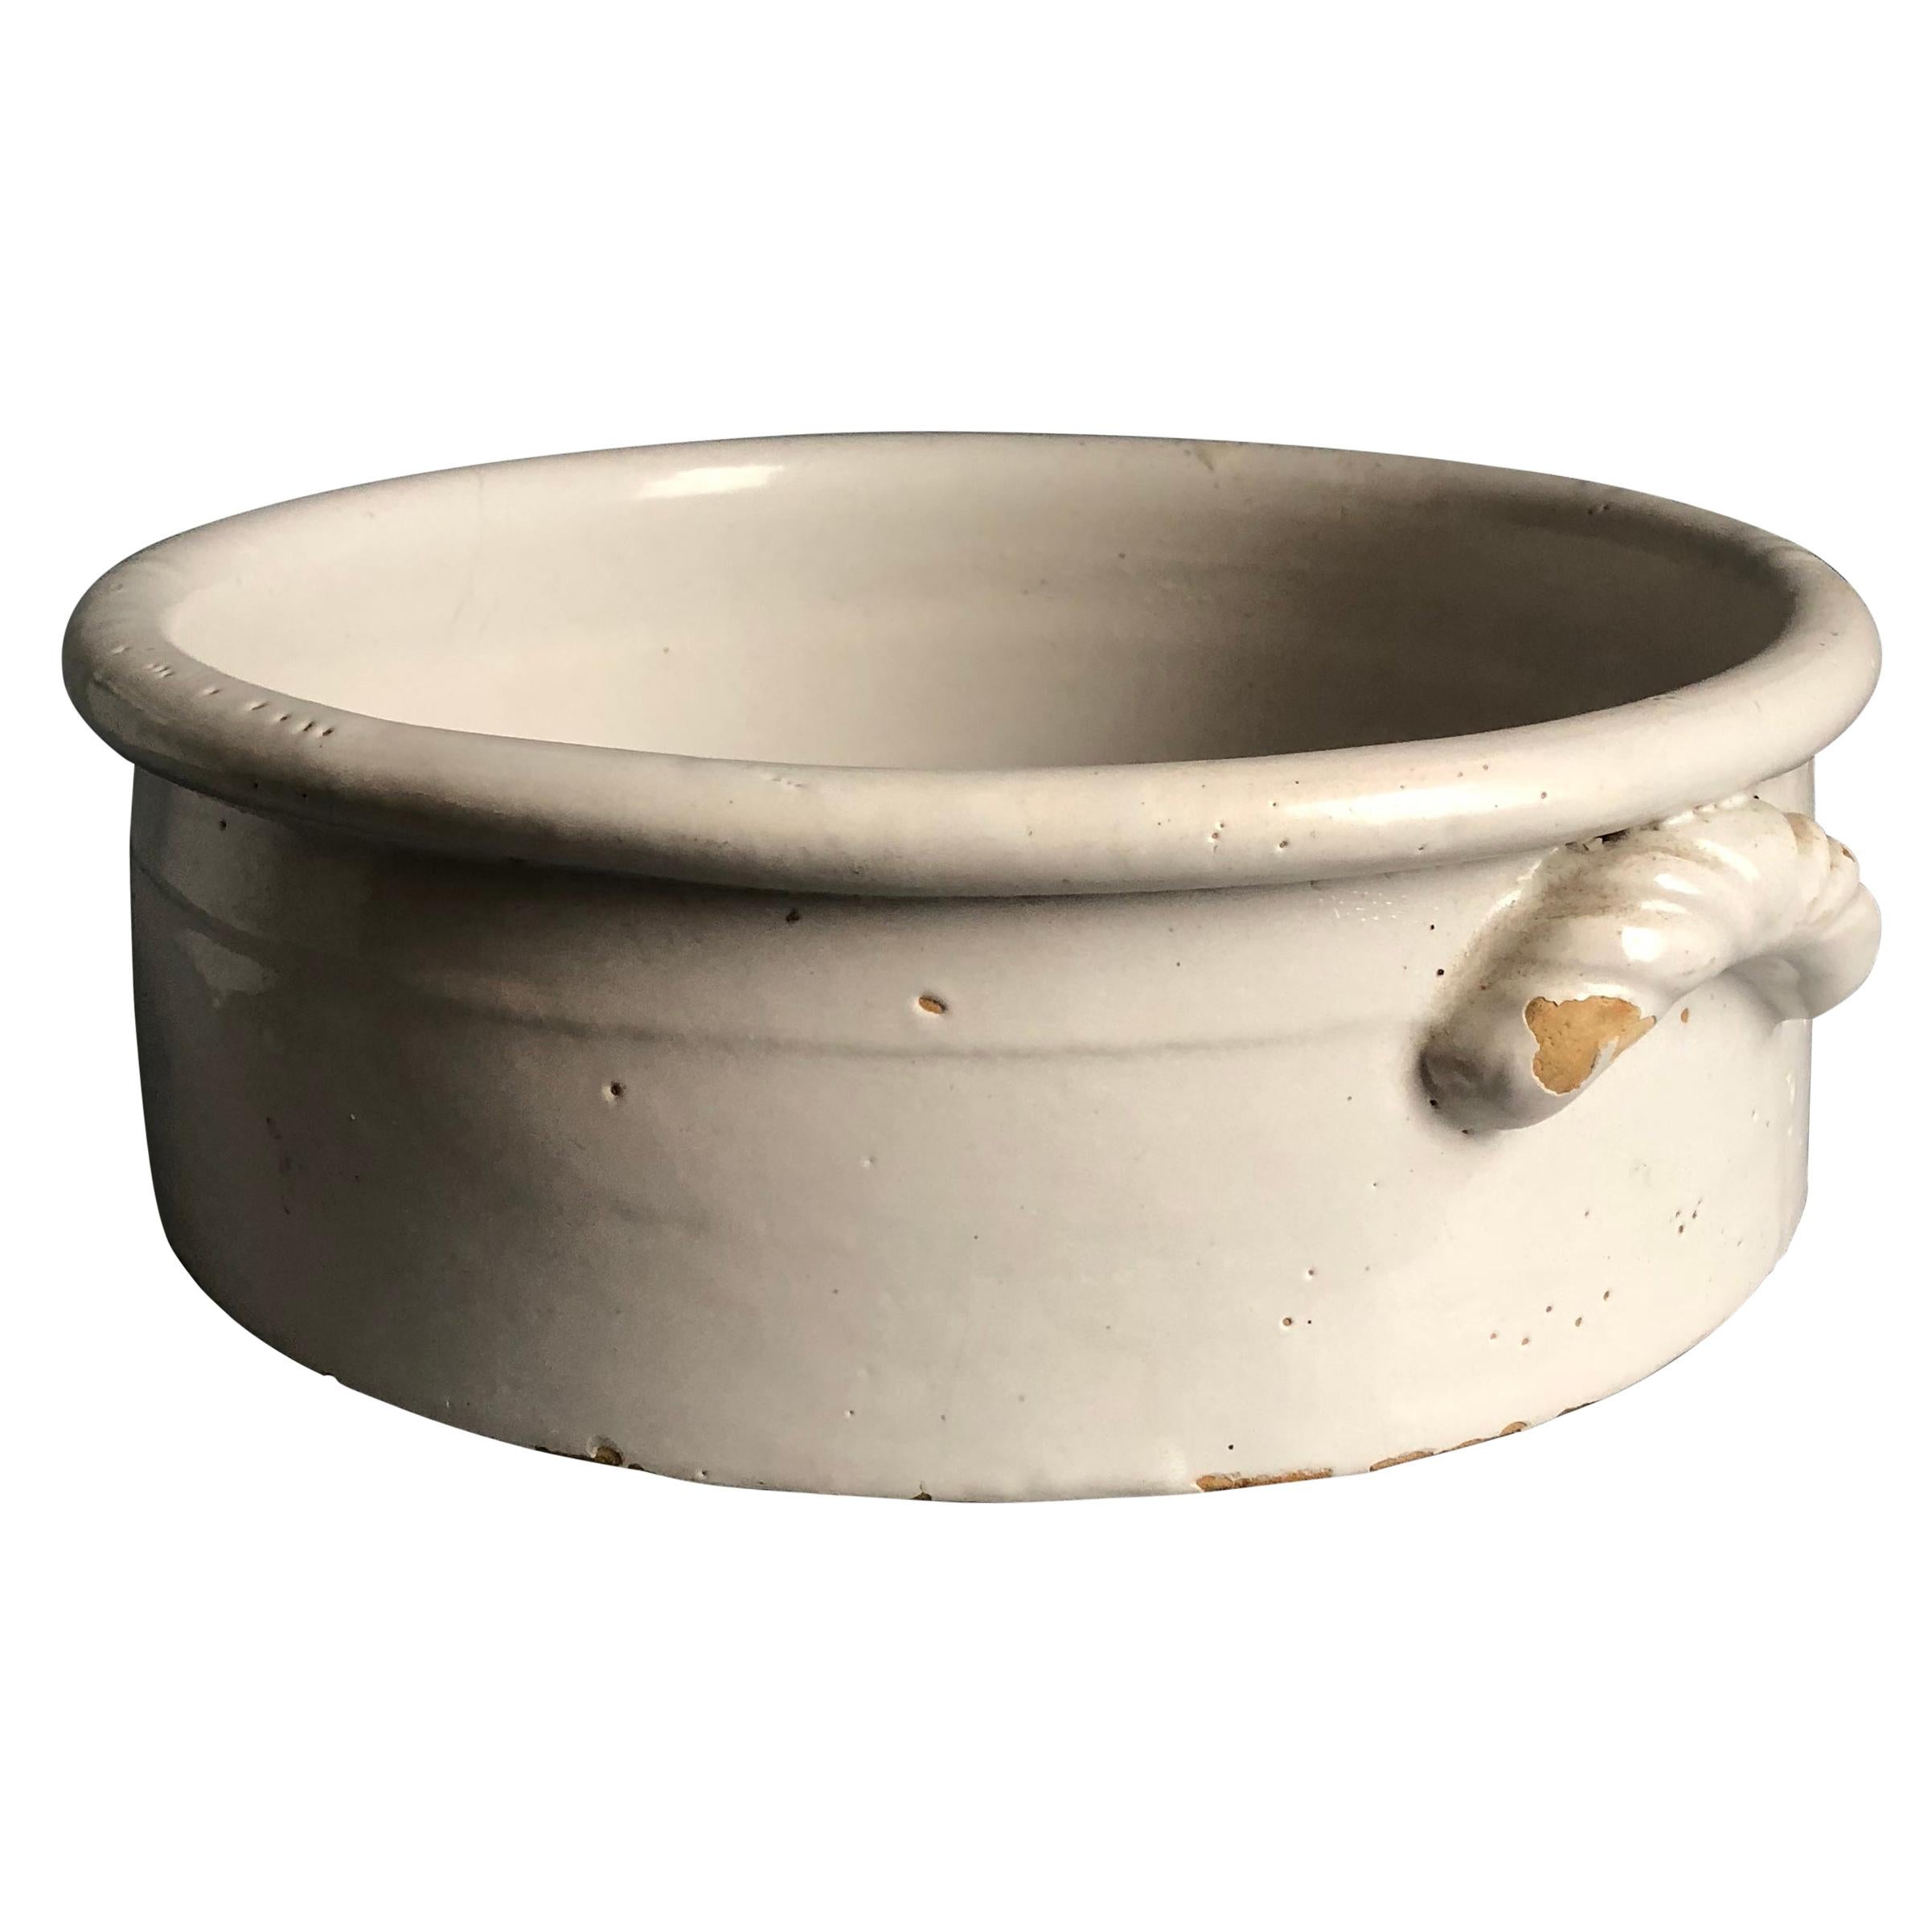 French Faience Low Cache Pot, 19th Century